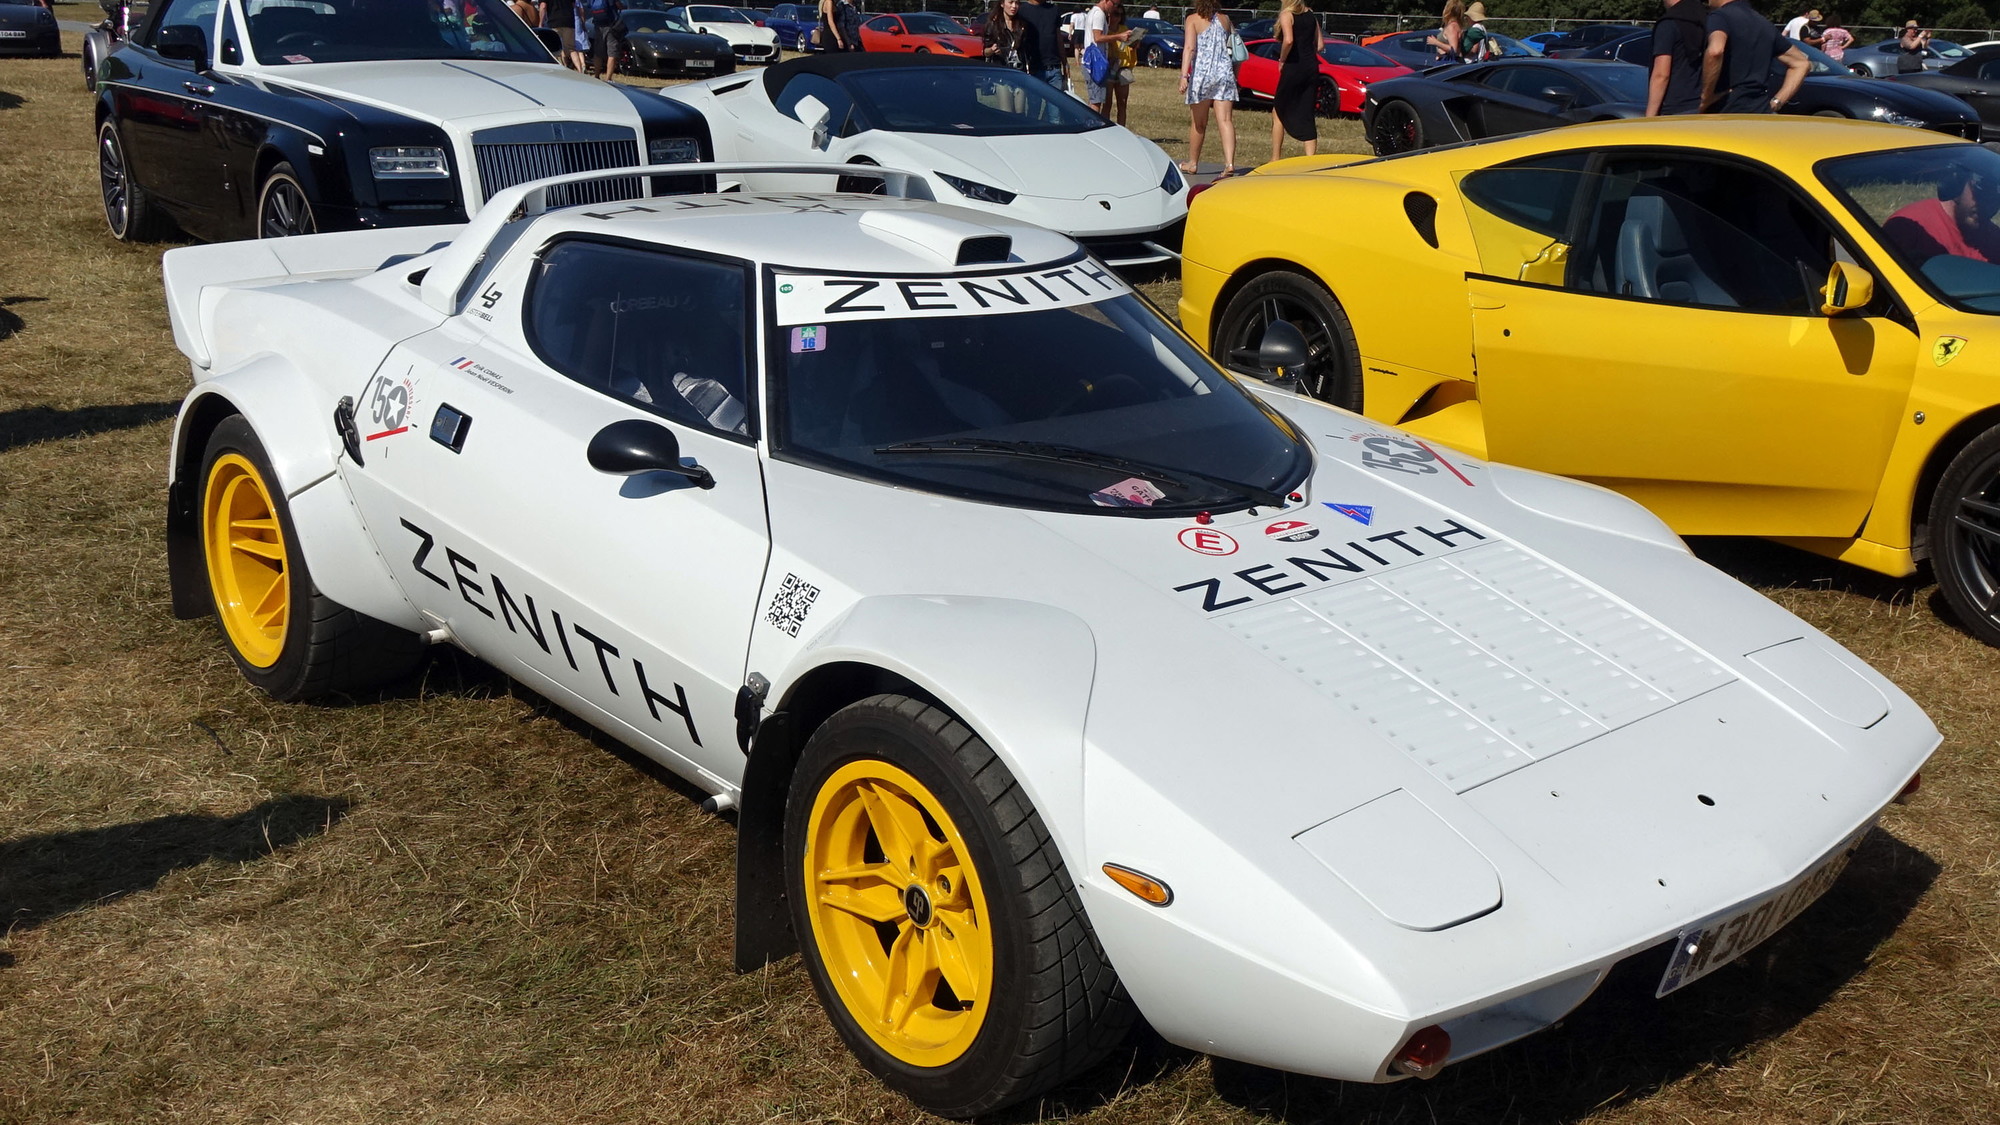 The parking lot at the 2018 Goodwood Festival of Speed